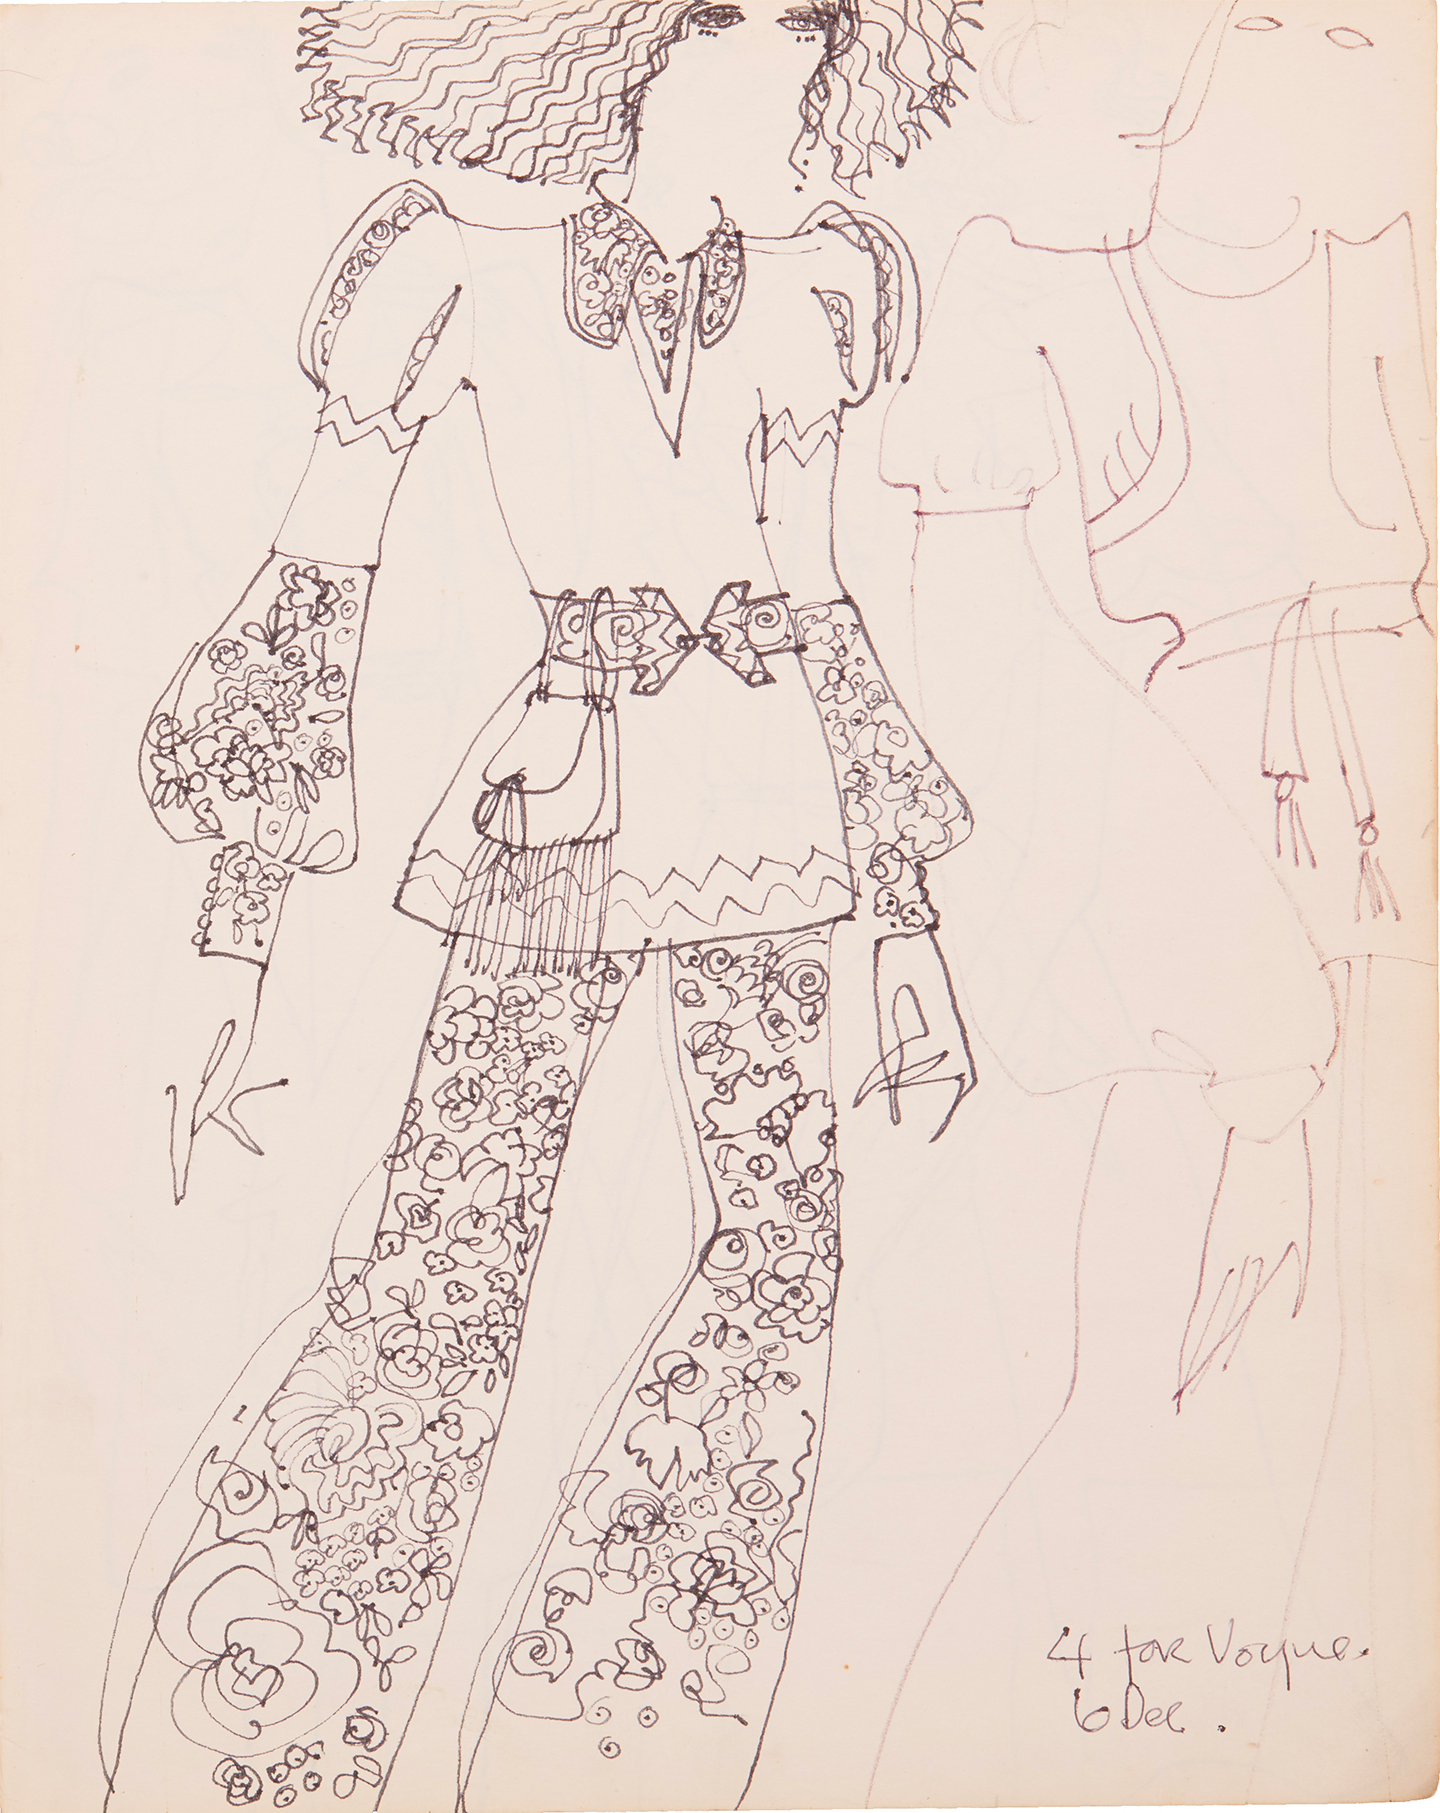 Ossie Clark Sketchbook, Fashion drawing for woman’s suit ca. 1968-69